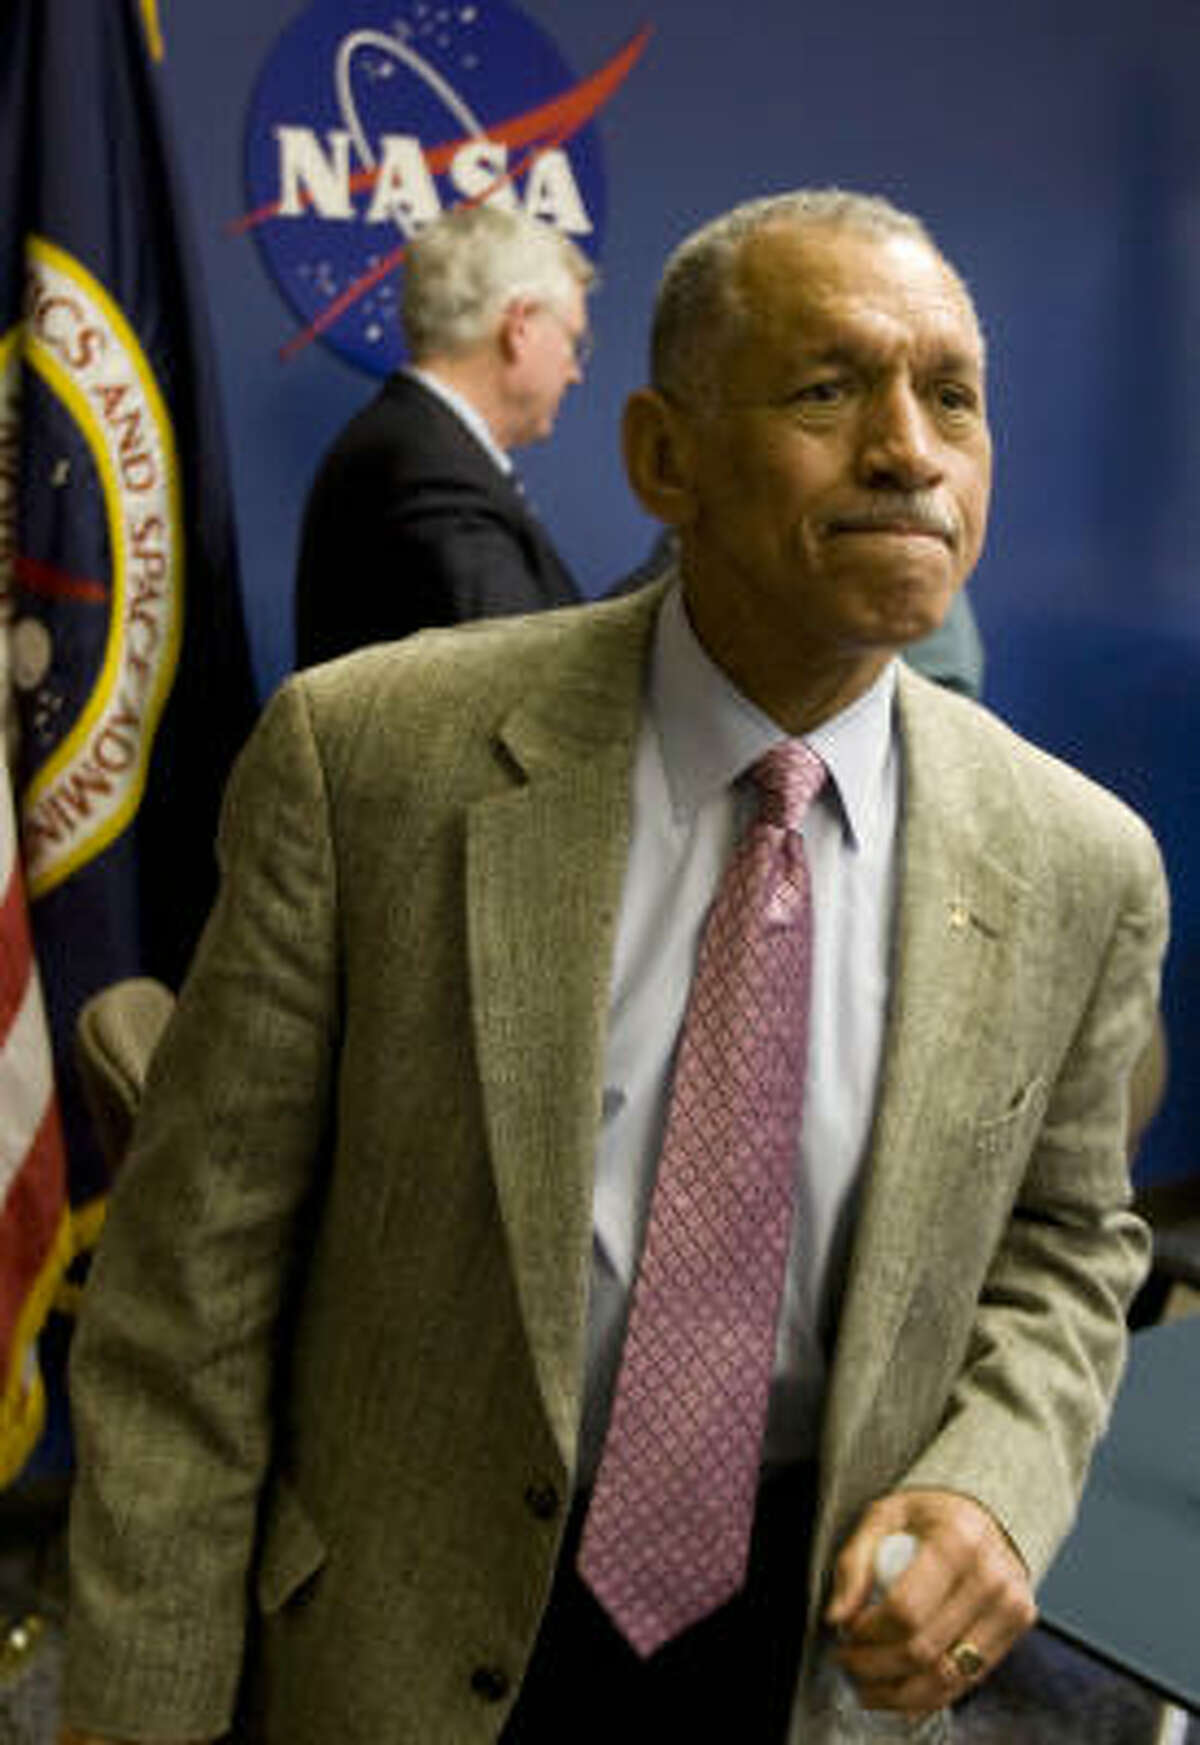 Charles Bolden's visit to China this weekend worries some in Congress.